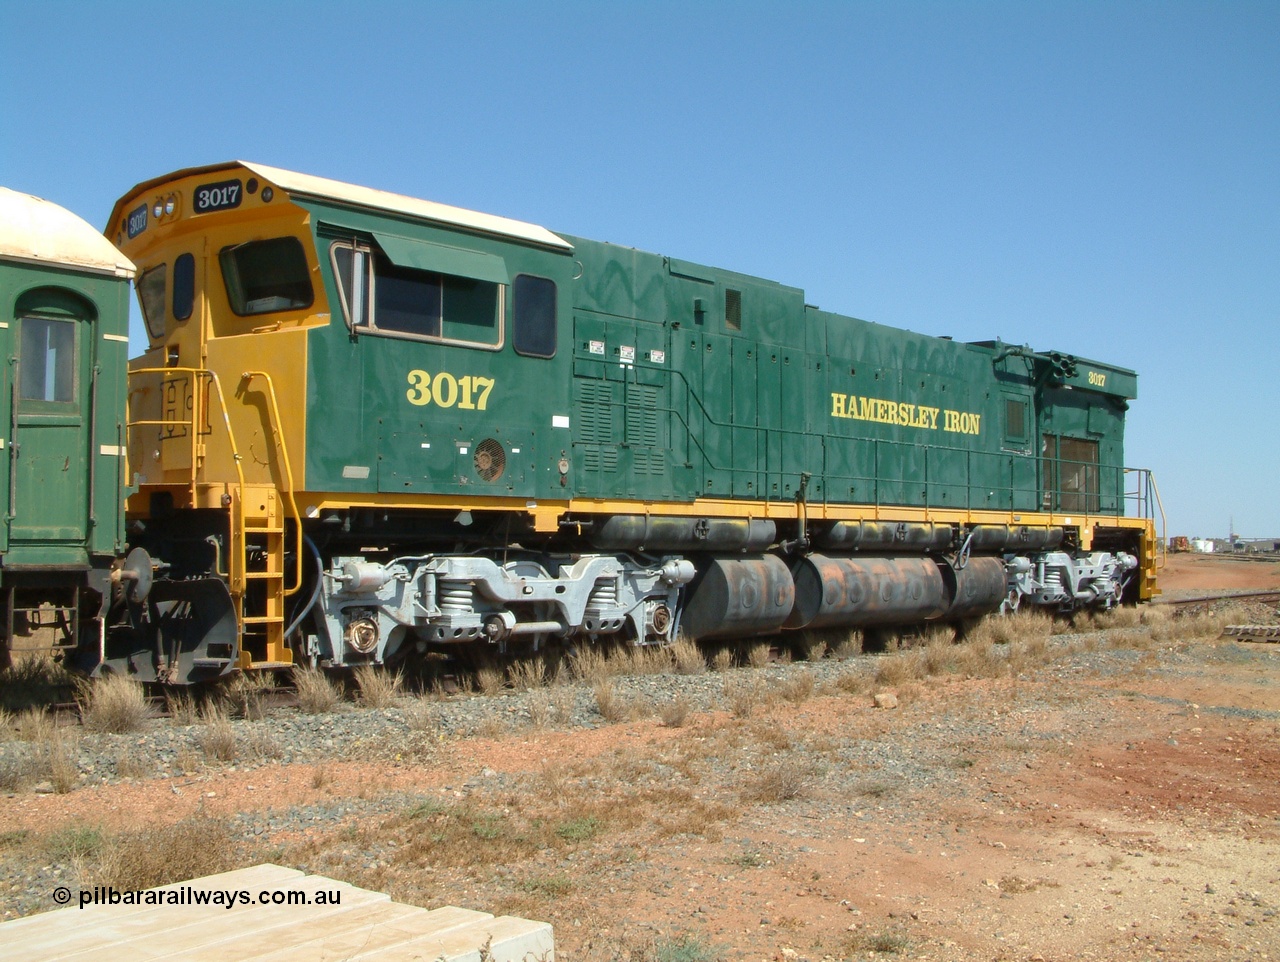 041014 142128
Pilbara Railways Historical Society, Comeng WA ALCo rebuild C636R locomotive 3017 serial WA-135-C-6043-04. The improved Pilbara cab was fitted as part of the rebuild in April 1985. Donated to Society in 1996. 14th October 2004.
Keywords: 3017;Comeng-WA;ALCo;C636R;WA-135-C-6043-04;rebuild;